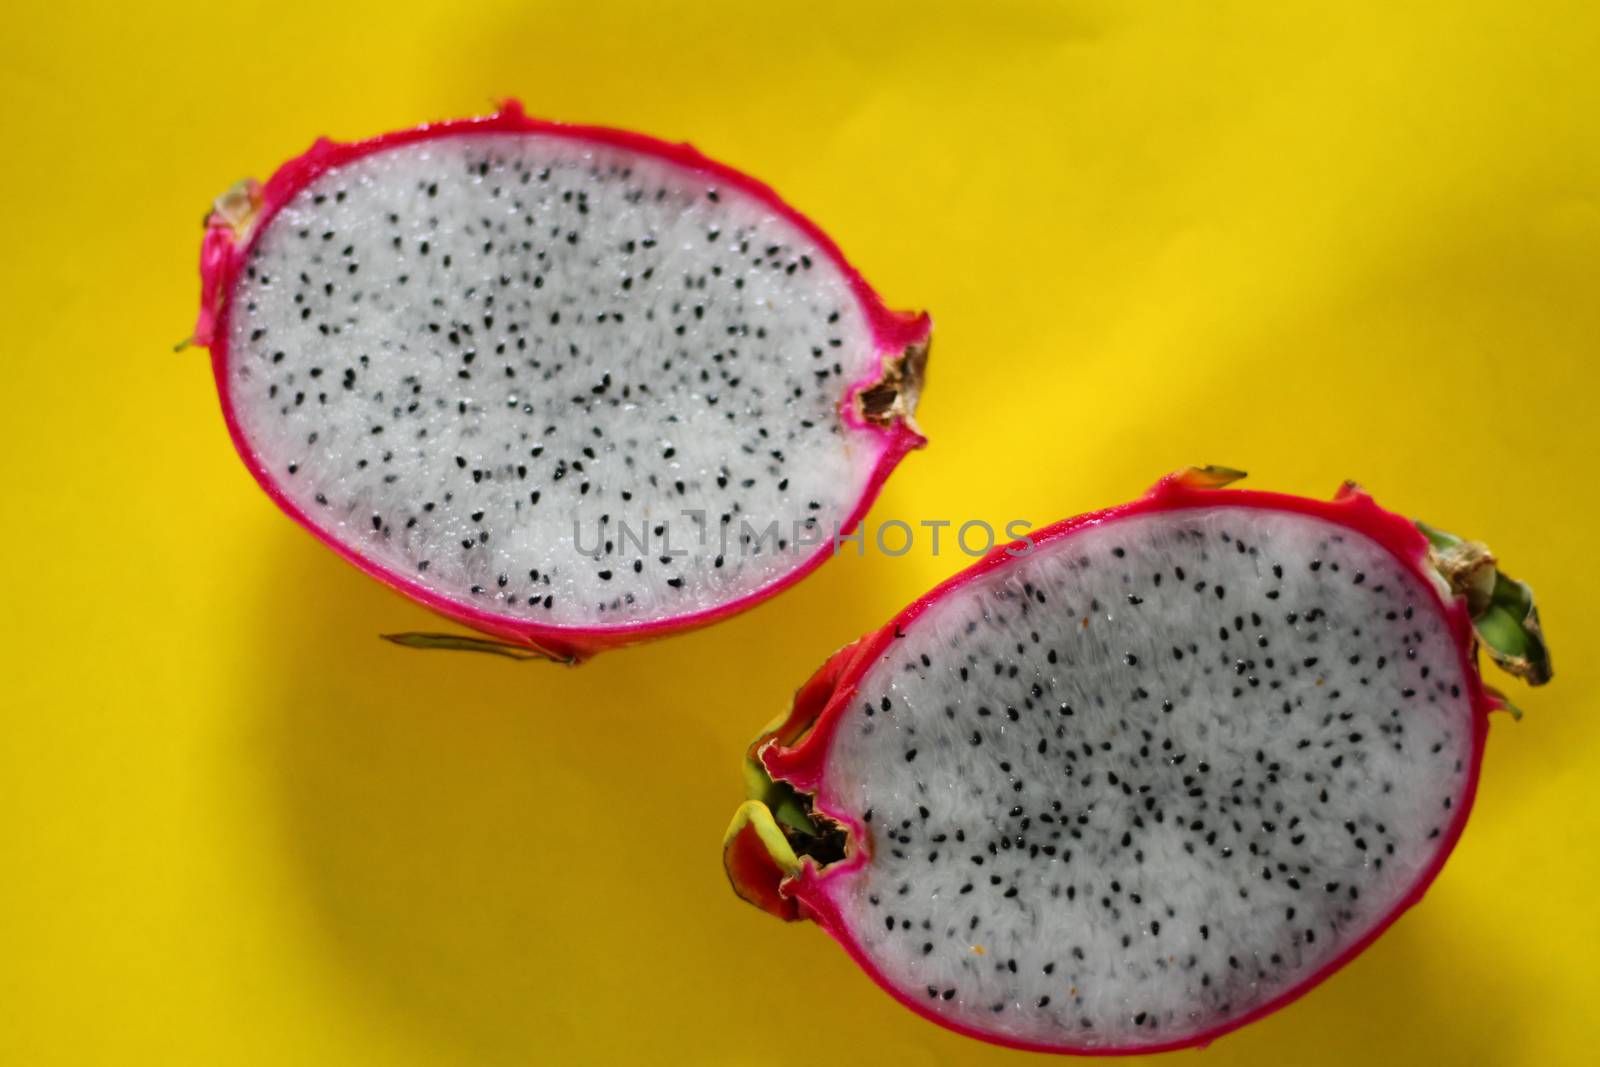 Fresh sliced dragonfruit or pitaya against a vibrant yellow background by Sonnet15